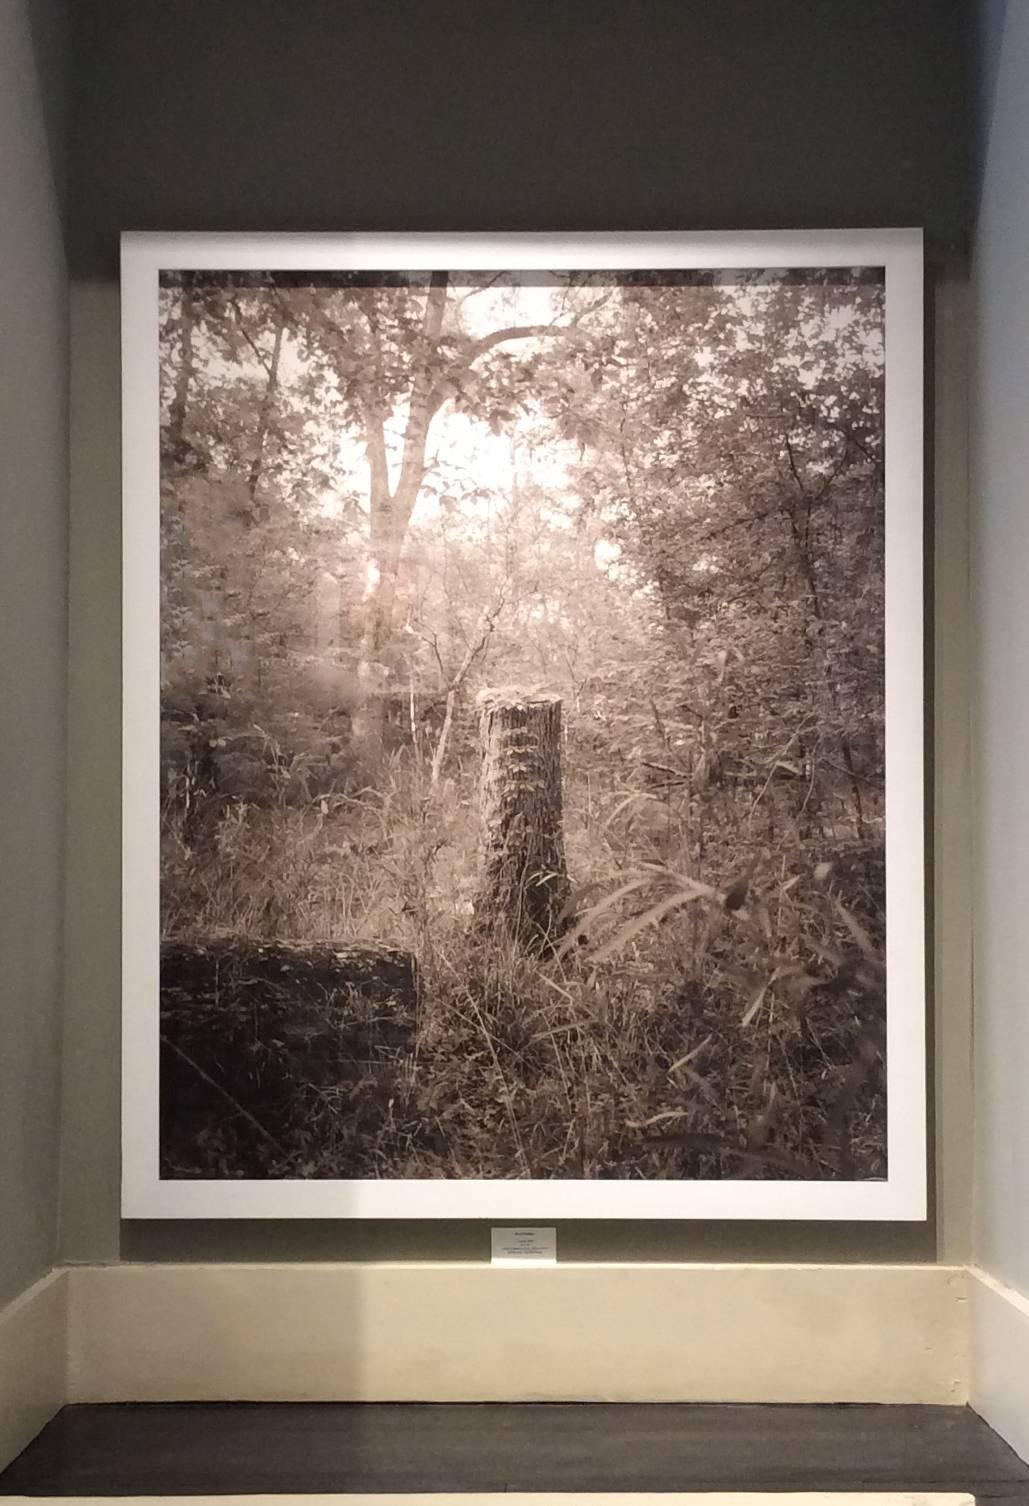 Stump (Contemporary Archival Pigment Print, Sepia Tone Landscape of Forest) - Photograph by David Halliday